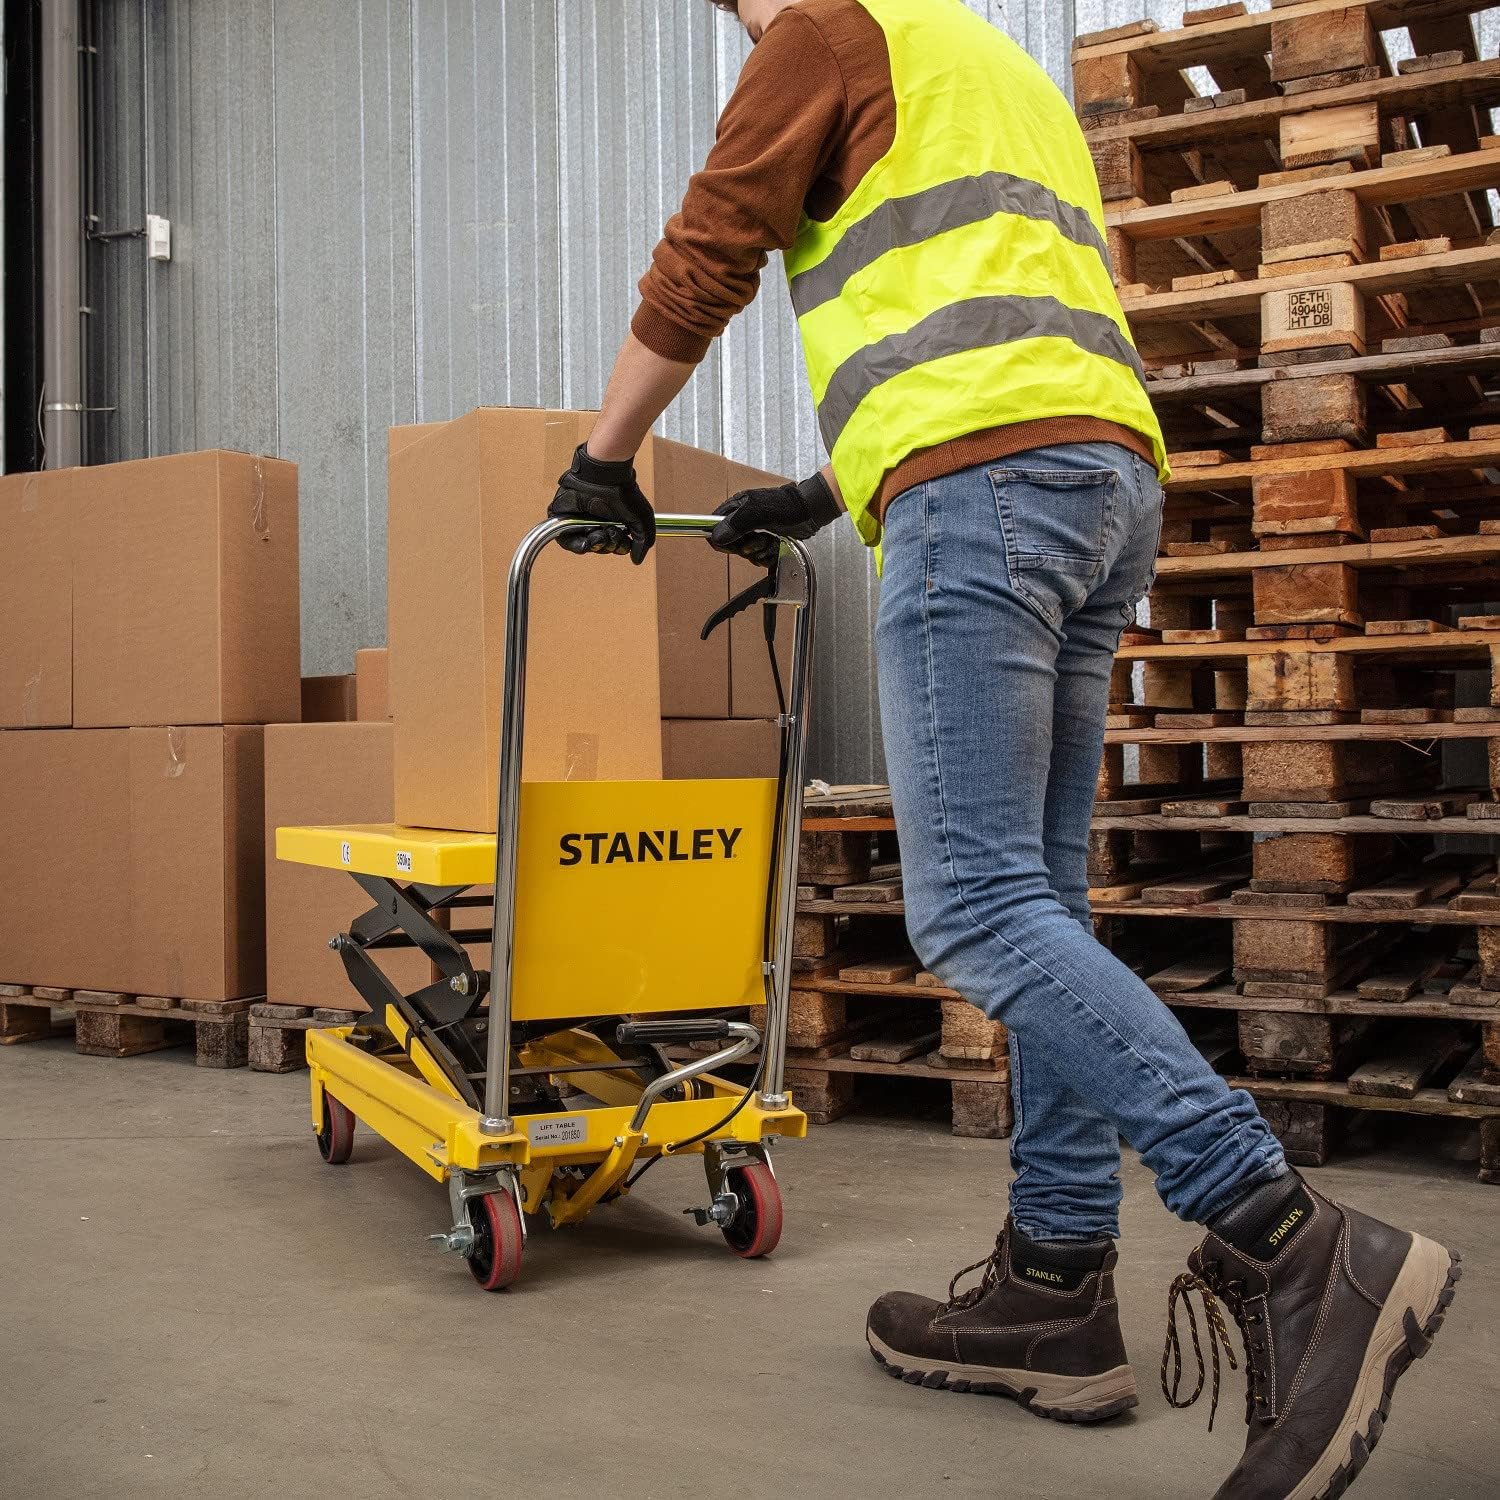 Stanley Hydraulic Scissor Lift Table 800Kg With 1.5m Lift Height SWXTI-CTABL-XX800